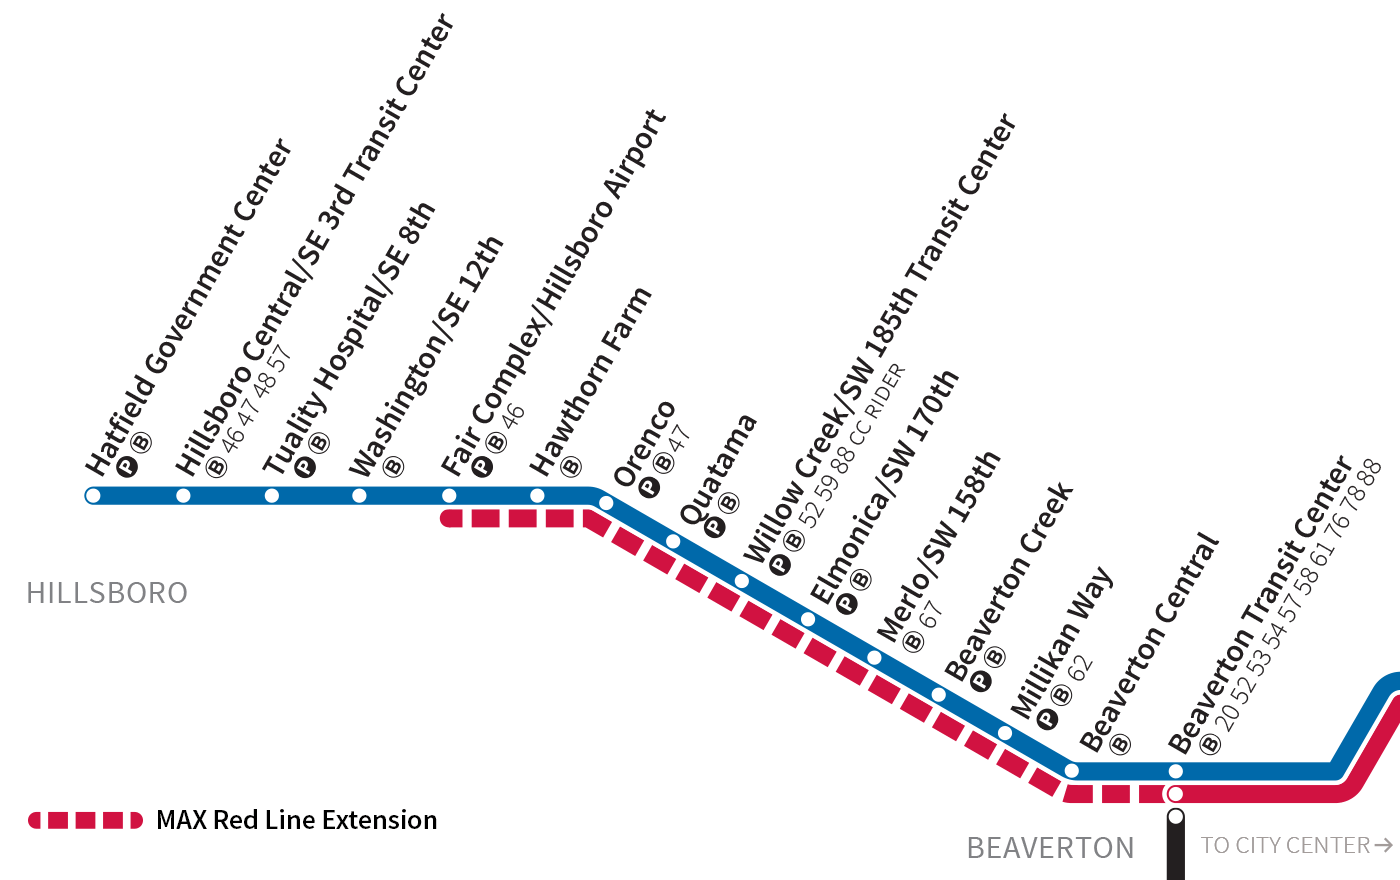 New Red Line stations